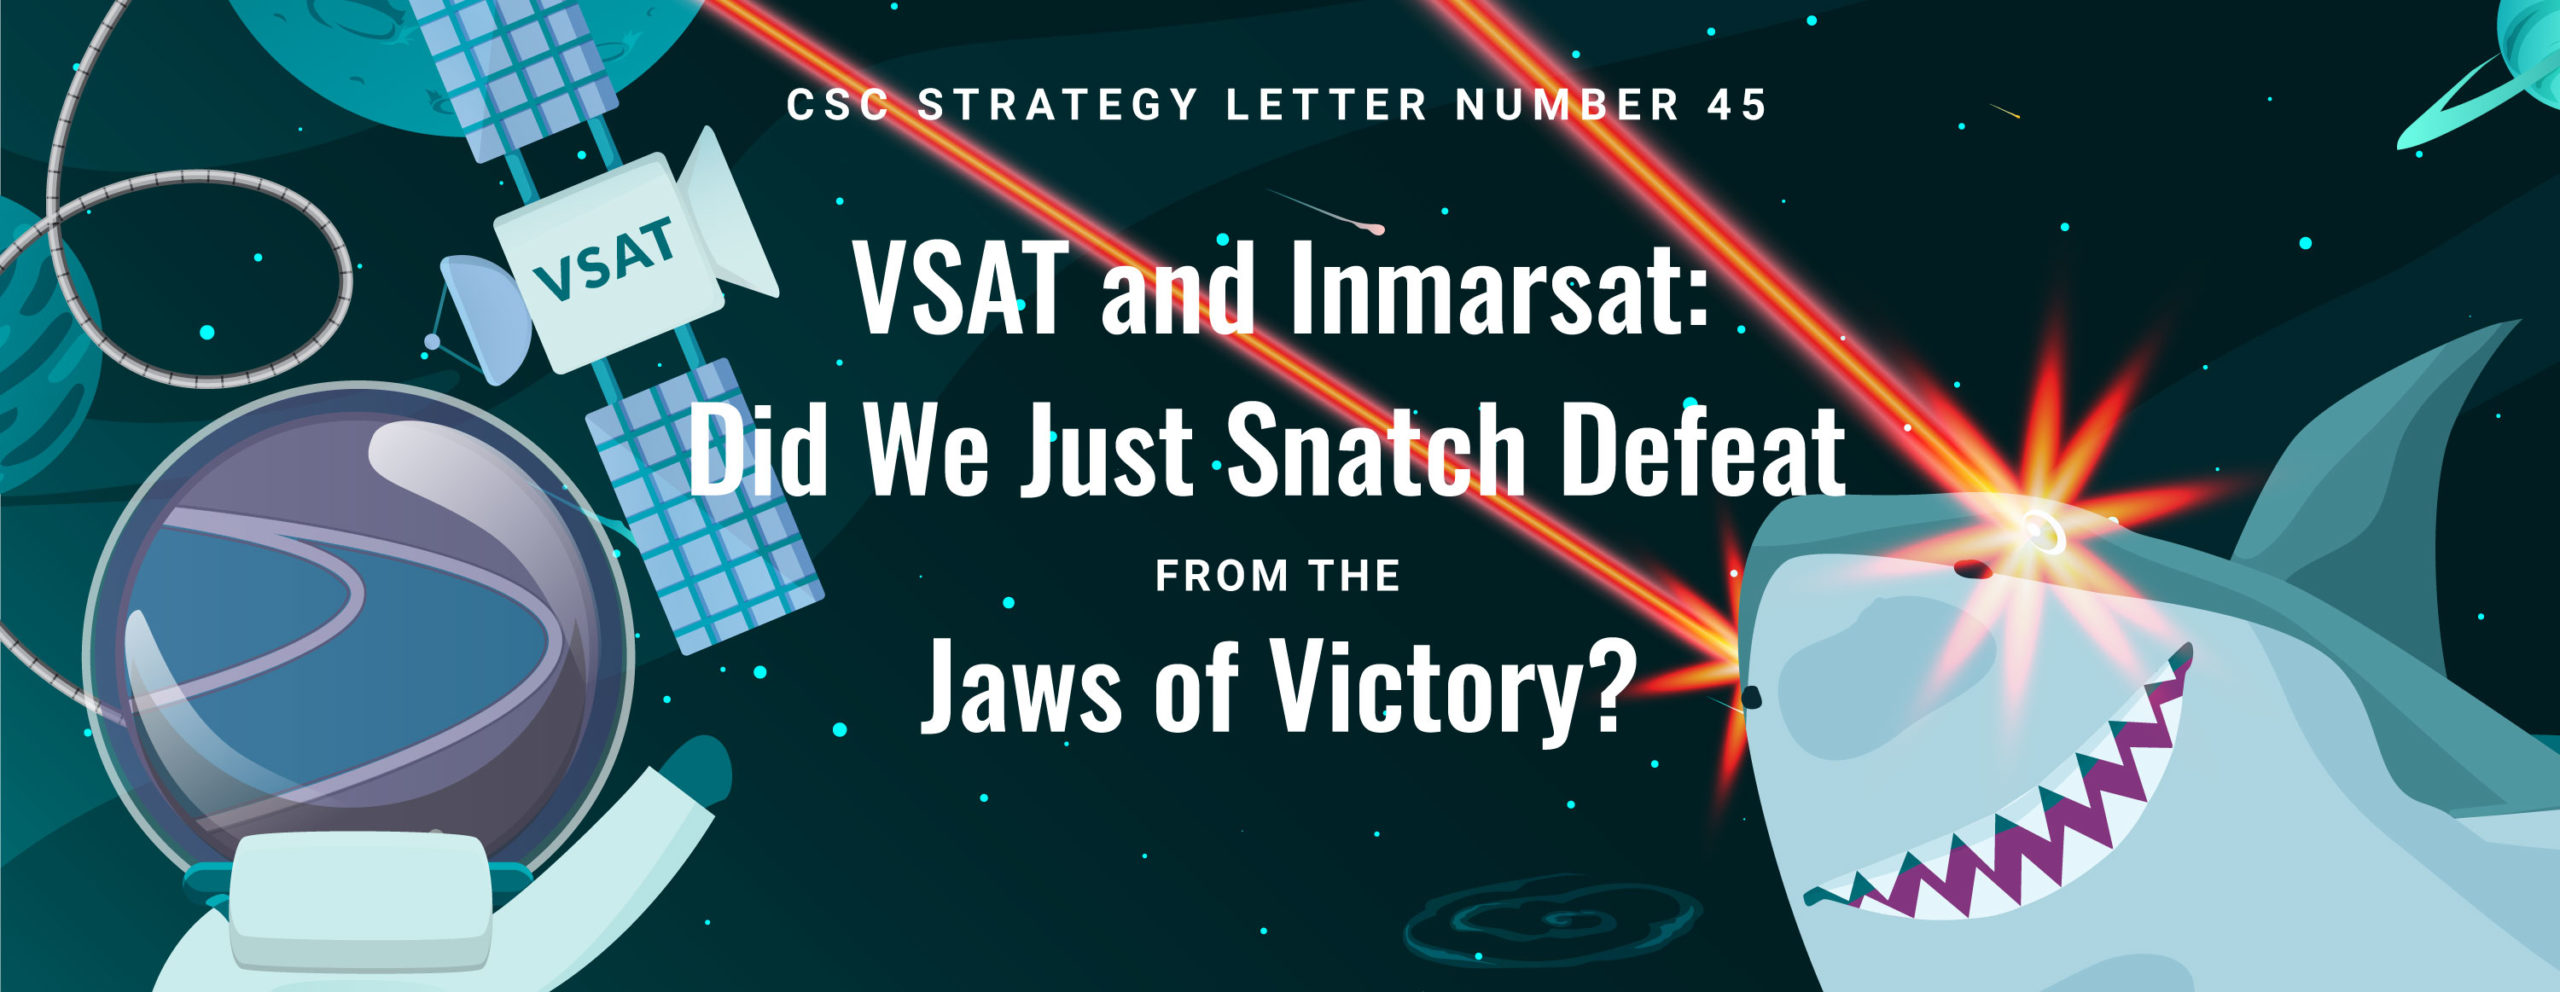 VSAT and Inmarsat: Did We Just Snatch Defeat from the Jaws of Victory? 